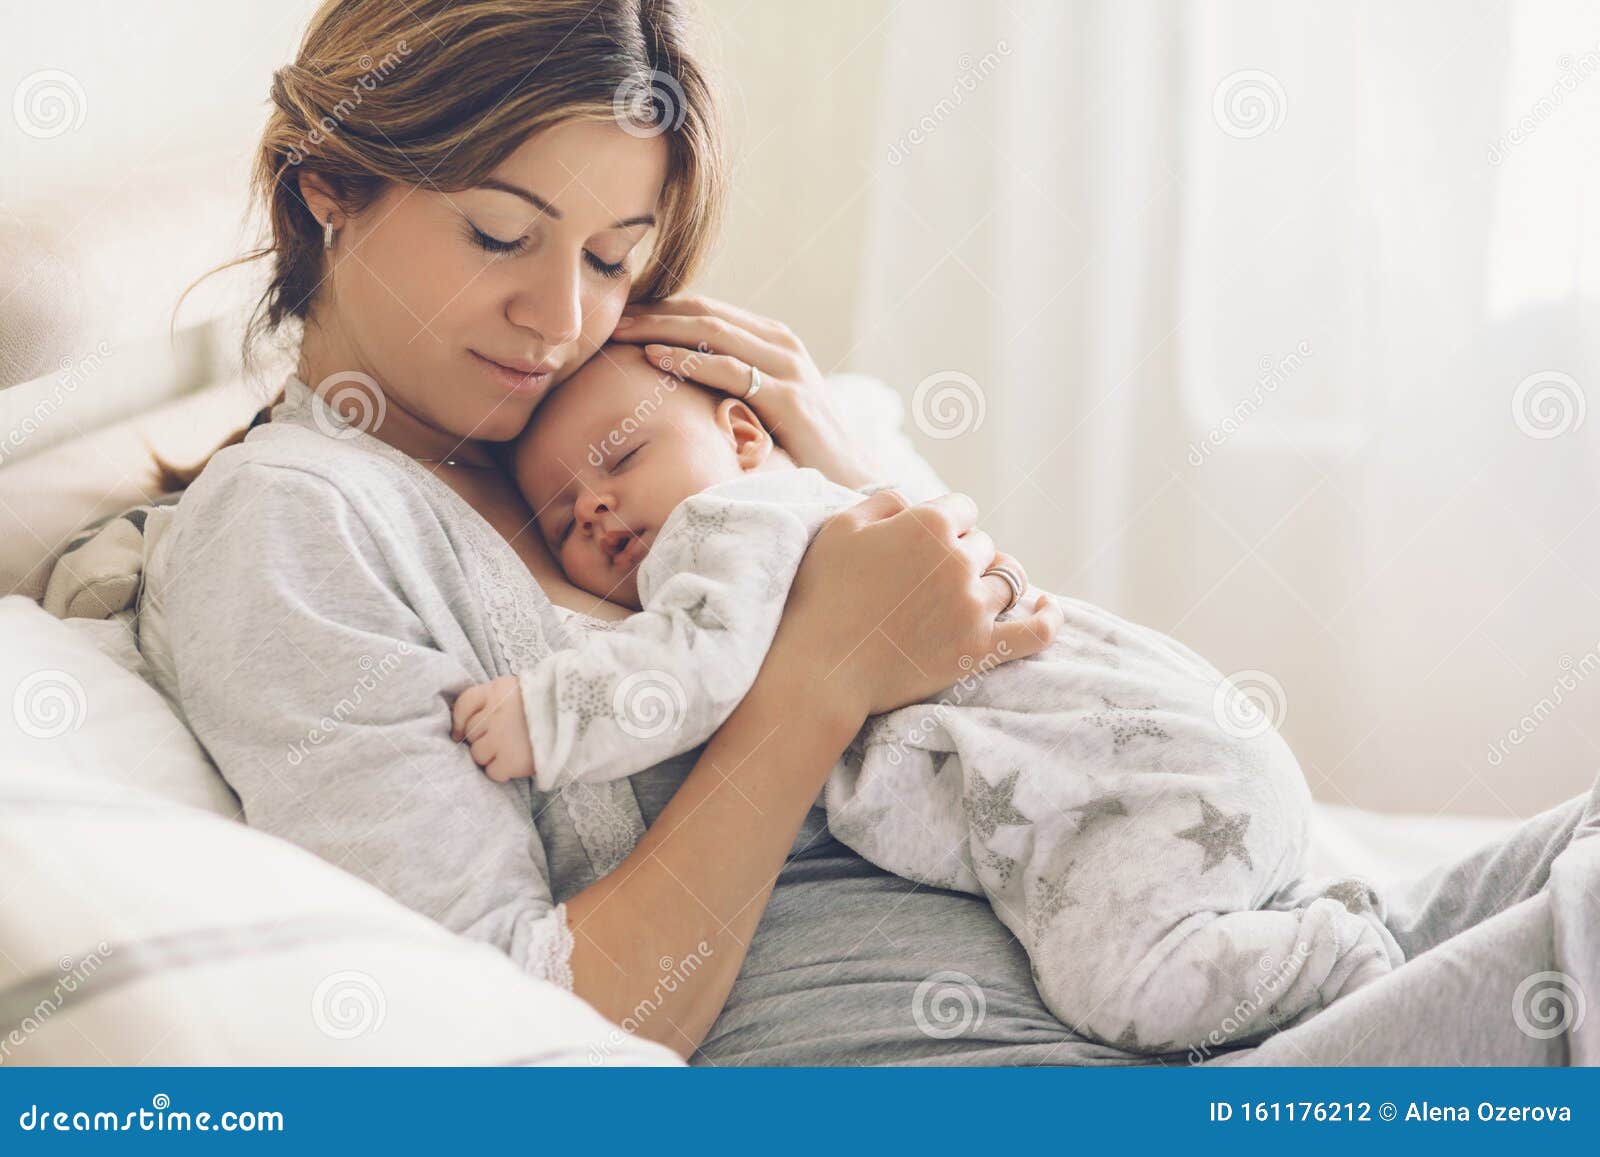 loving mom carying of her newborn baby at home